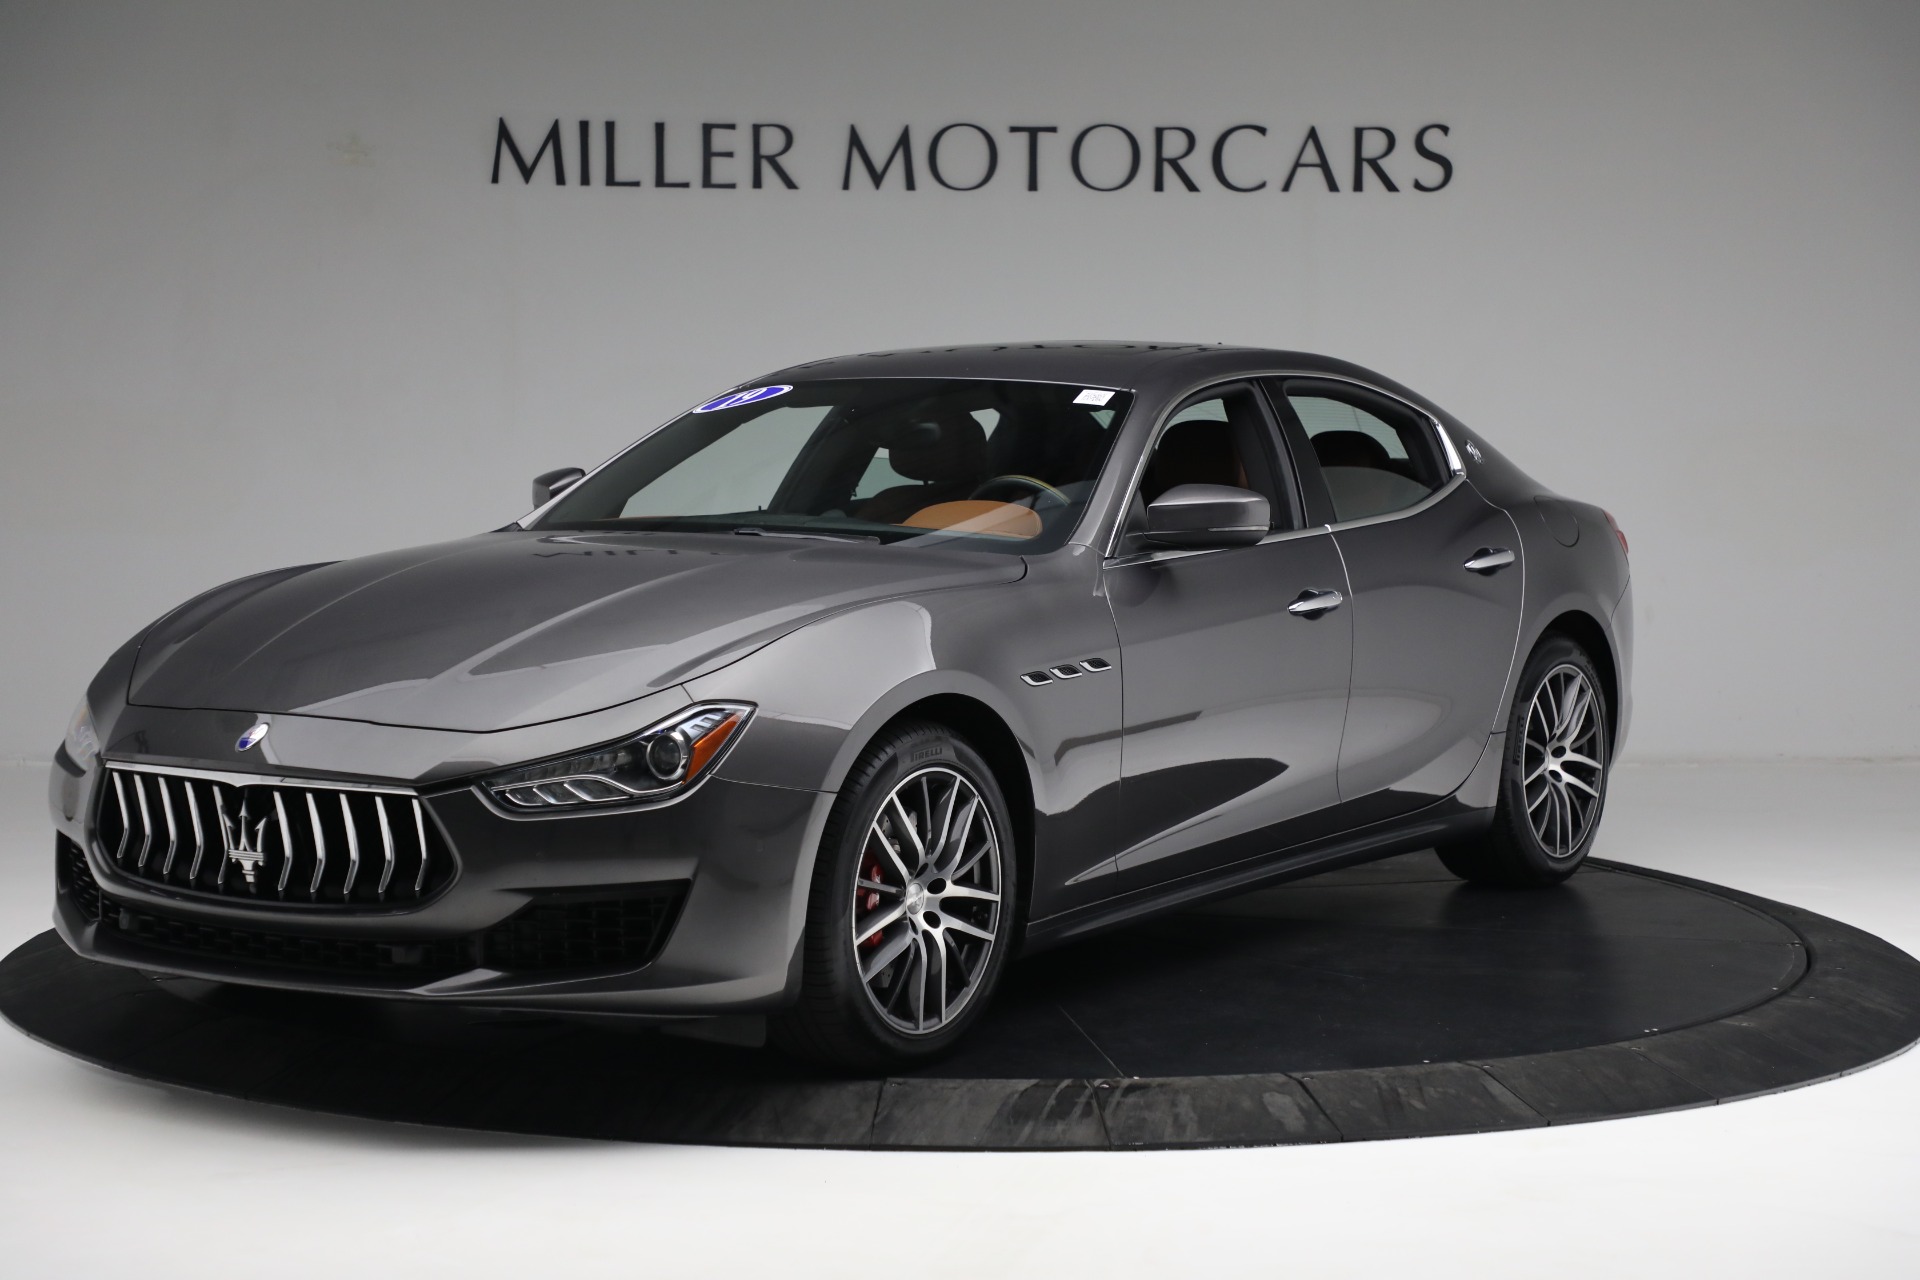 Used 2019 Maserati Ghibli S Q4 for sale $57,900 at Pagani of Greenwich in Greenwich CT 06830 1